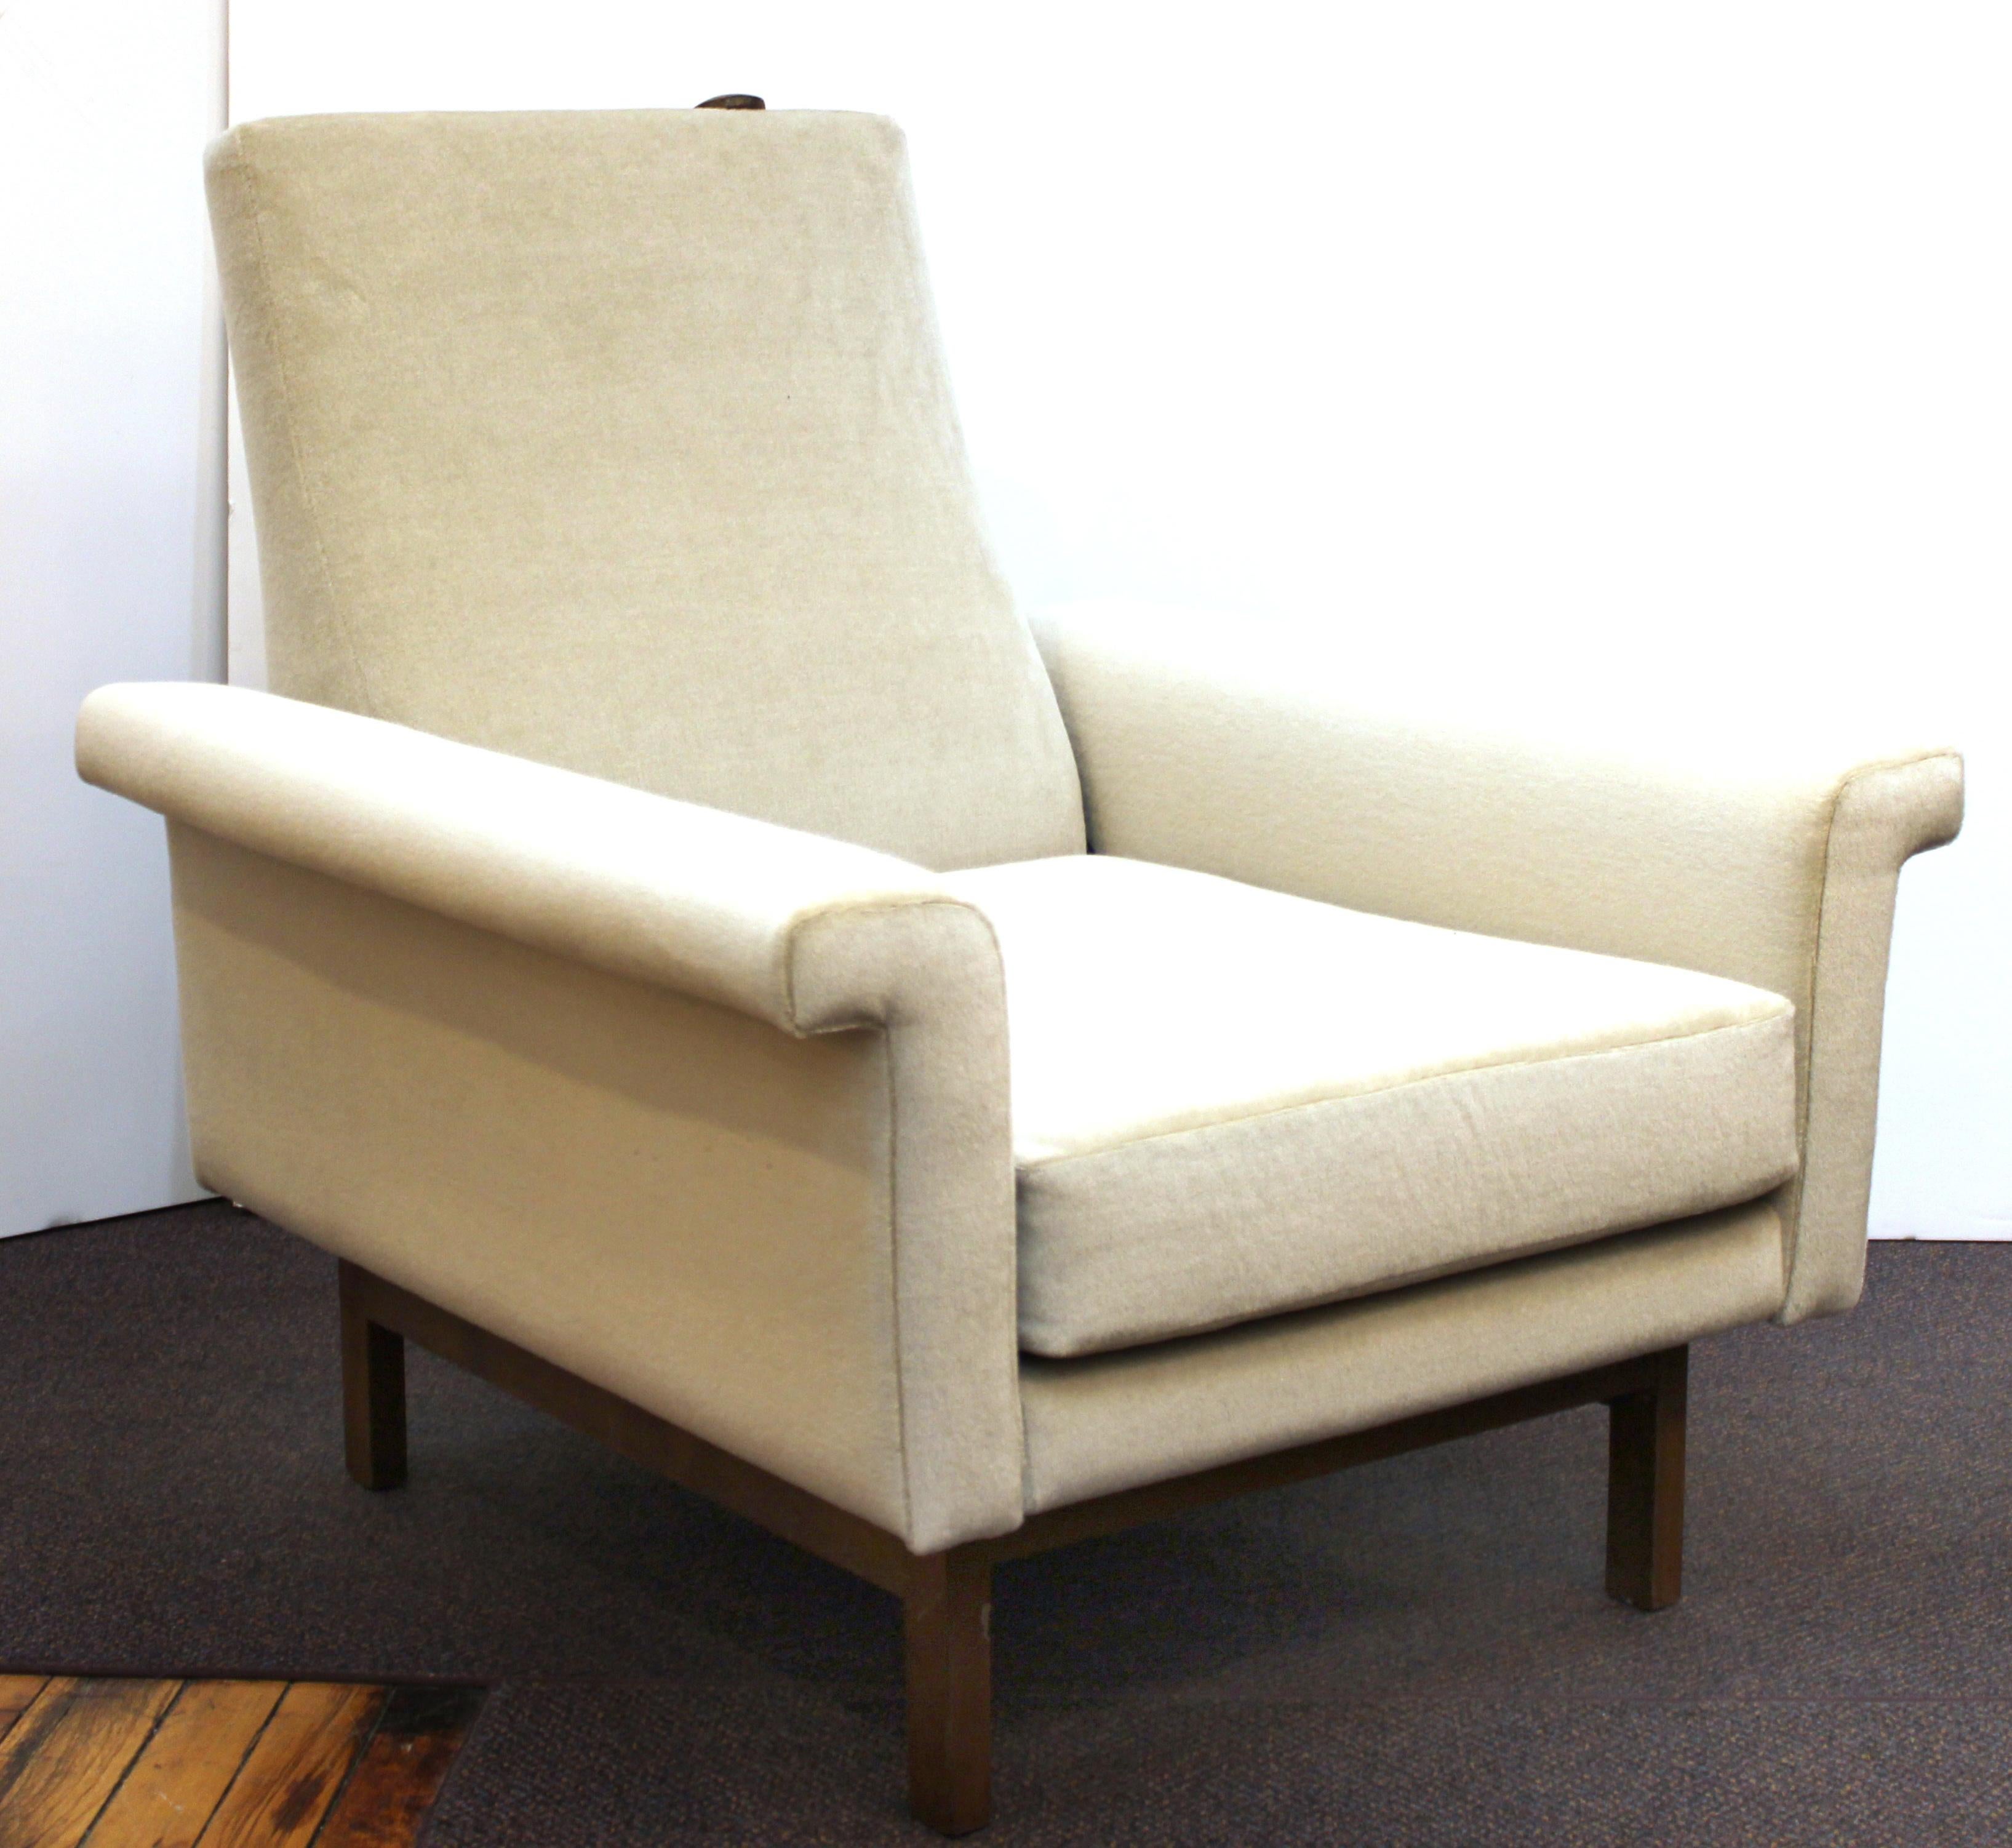 Mid-Century Modern lounge armchair with matching ottoman, designed and made in Germany in the mid-20th century. The armchair has a reclining function with a button on the top of the backrest. 'Made in Germany' label on the bottom. The pair is in